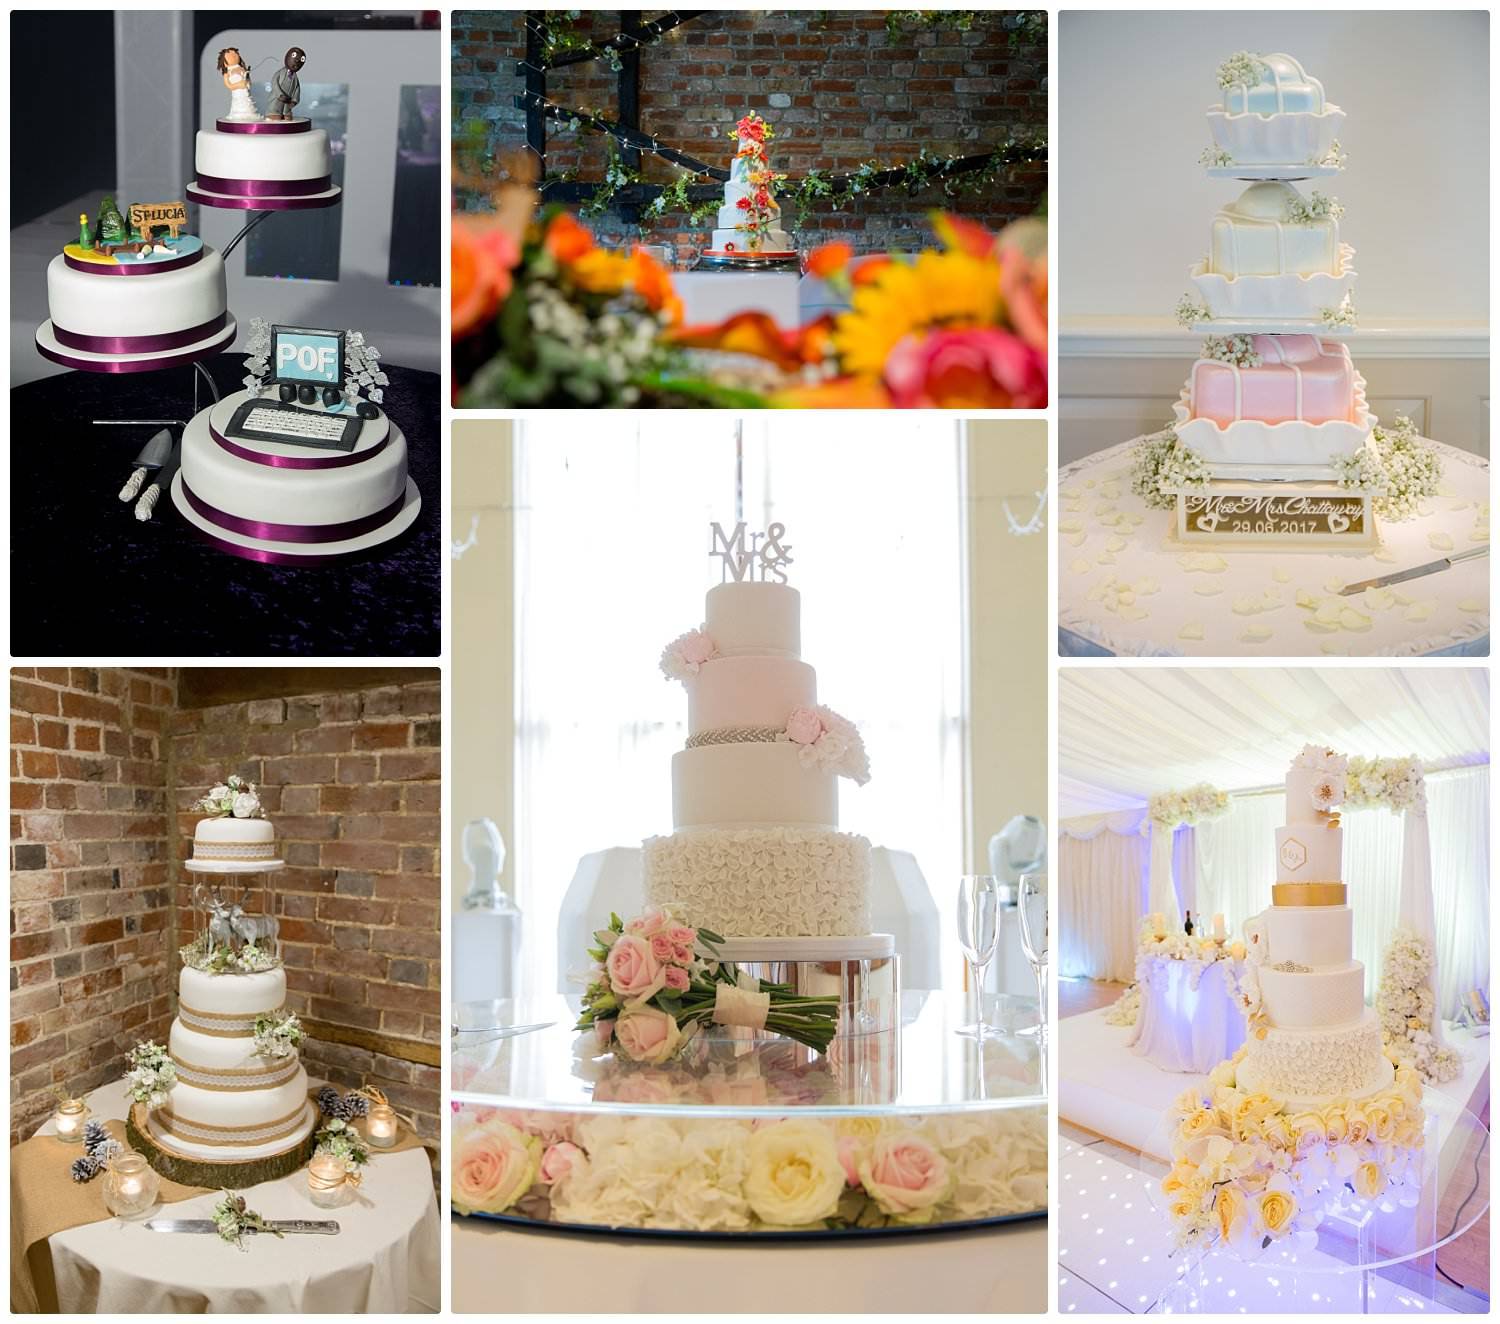 Top tips for choosing your wedding cake-Display